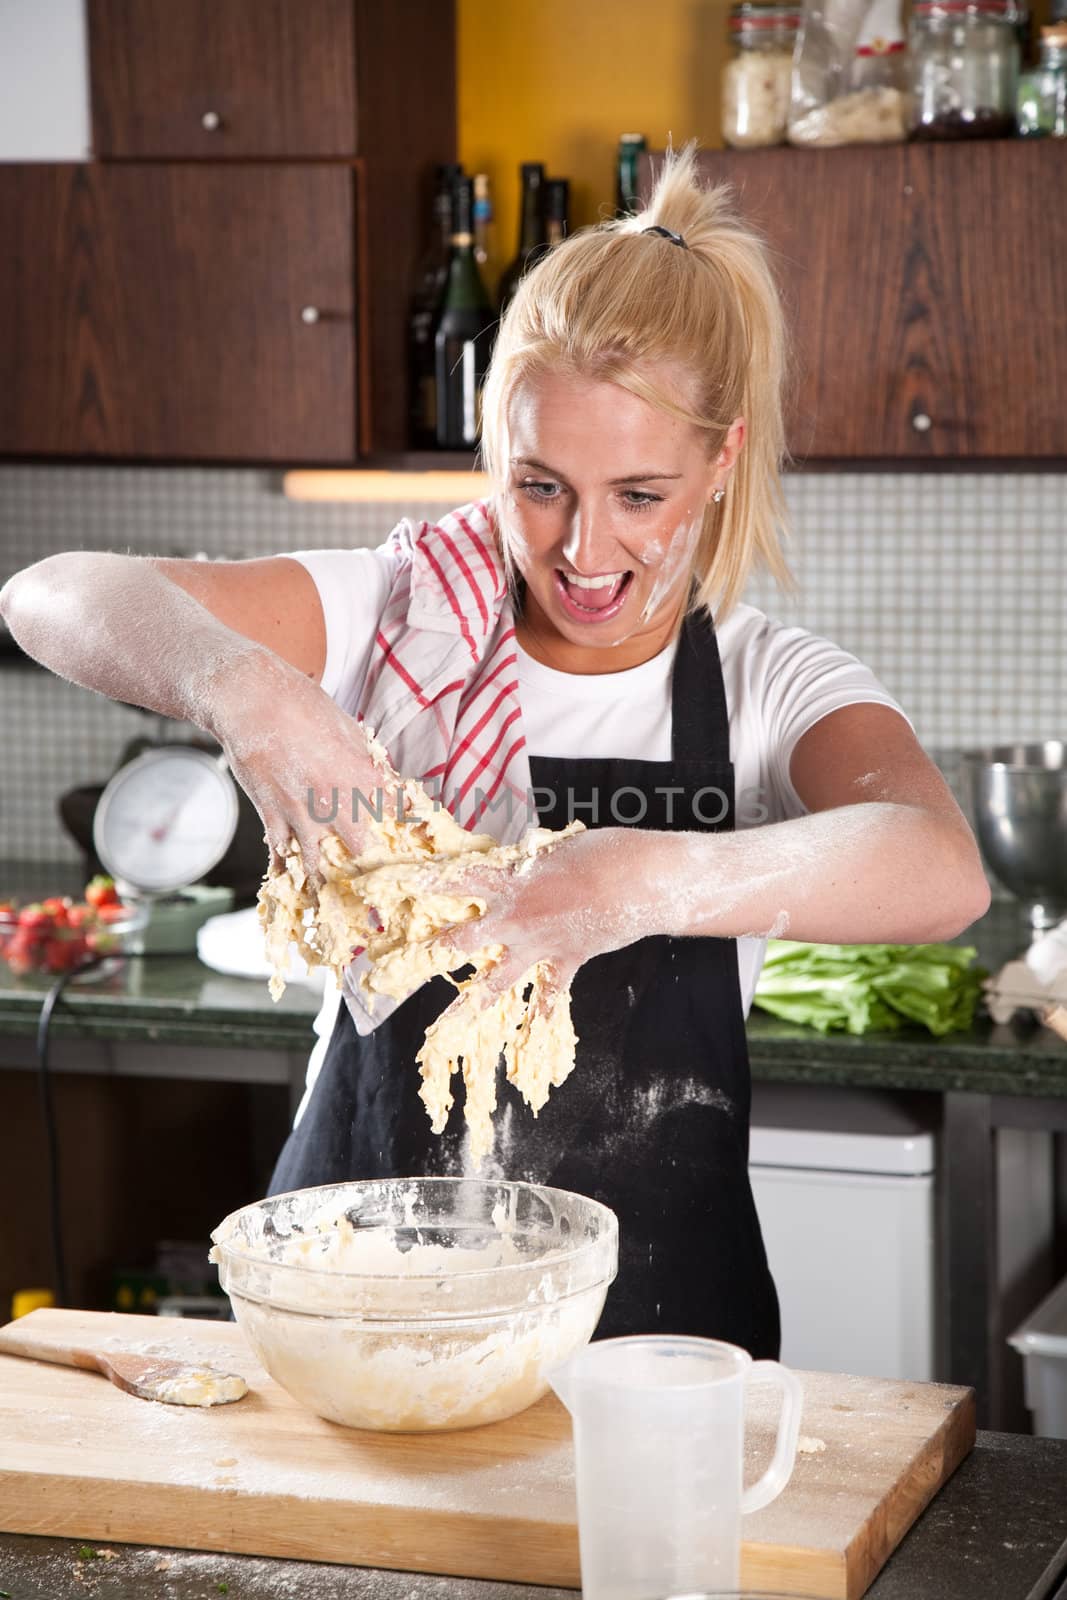 Female chef with her hands covered in sticky dough